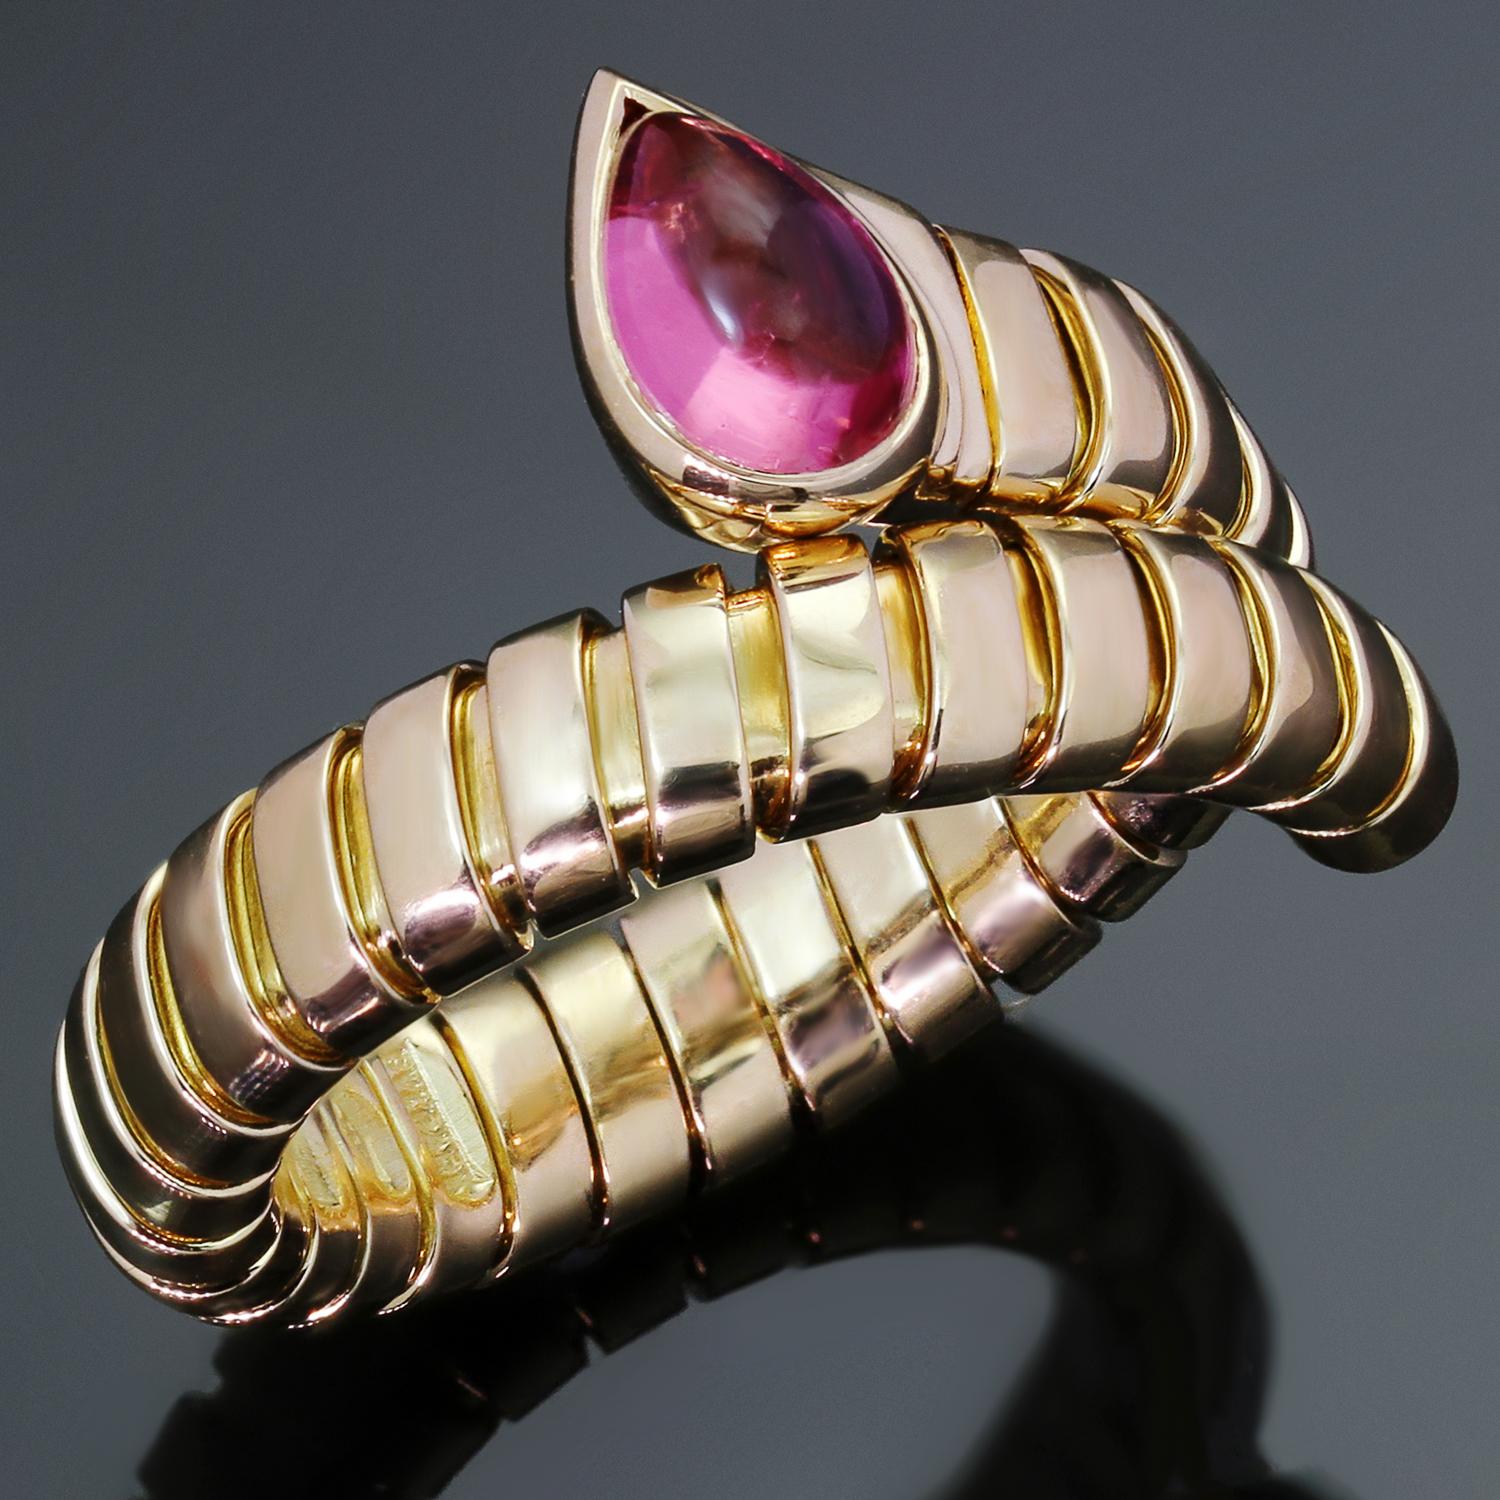 This gorgeous Bvlgari ring from the iconic Tubogas collection features a slightly adjustable wrap design crafted in 18k yellow gold and accented with a pear-cut pink tourmaline. Marked Bvlgari, 750, Italian marks. The ring is adjustable from 6.5 to